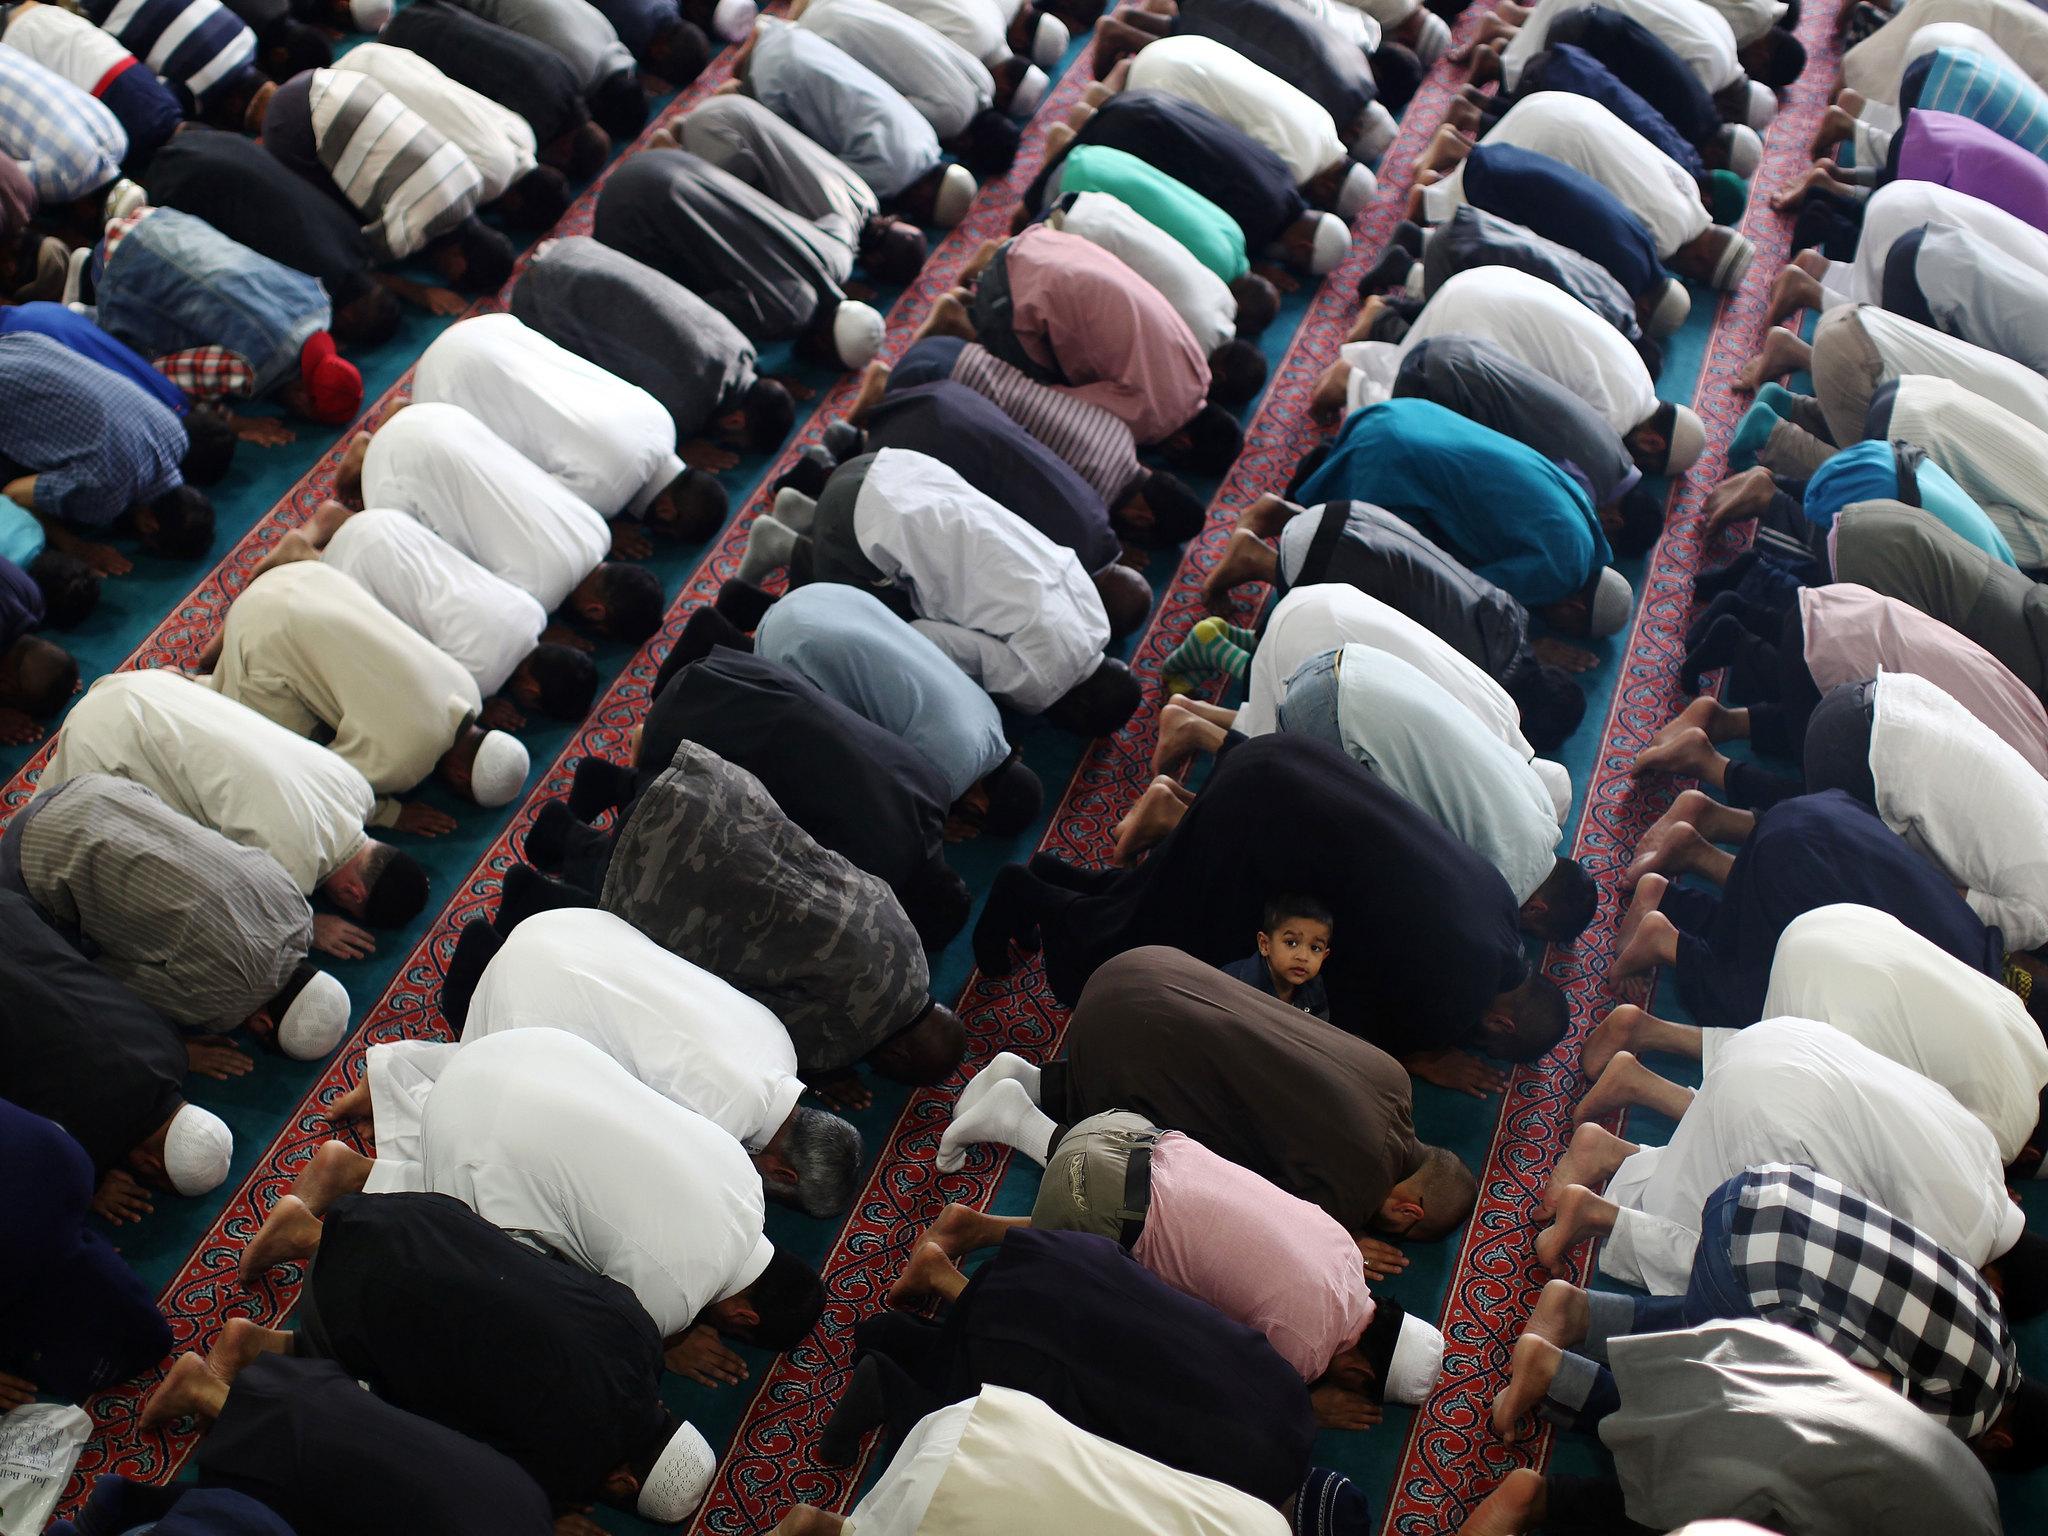 Muslim men pray at the East London Mosque on the last day of Ramadan